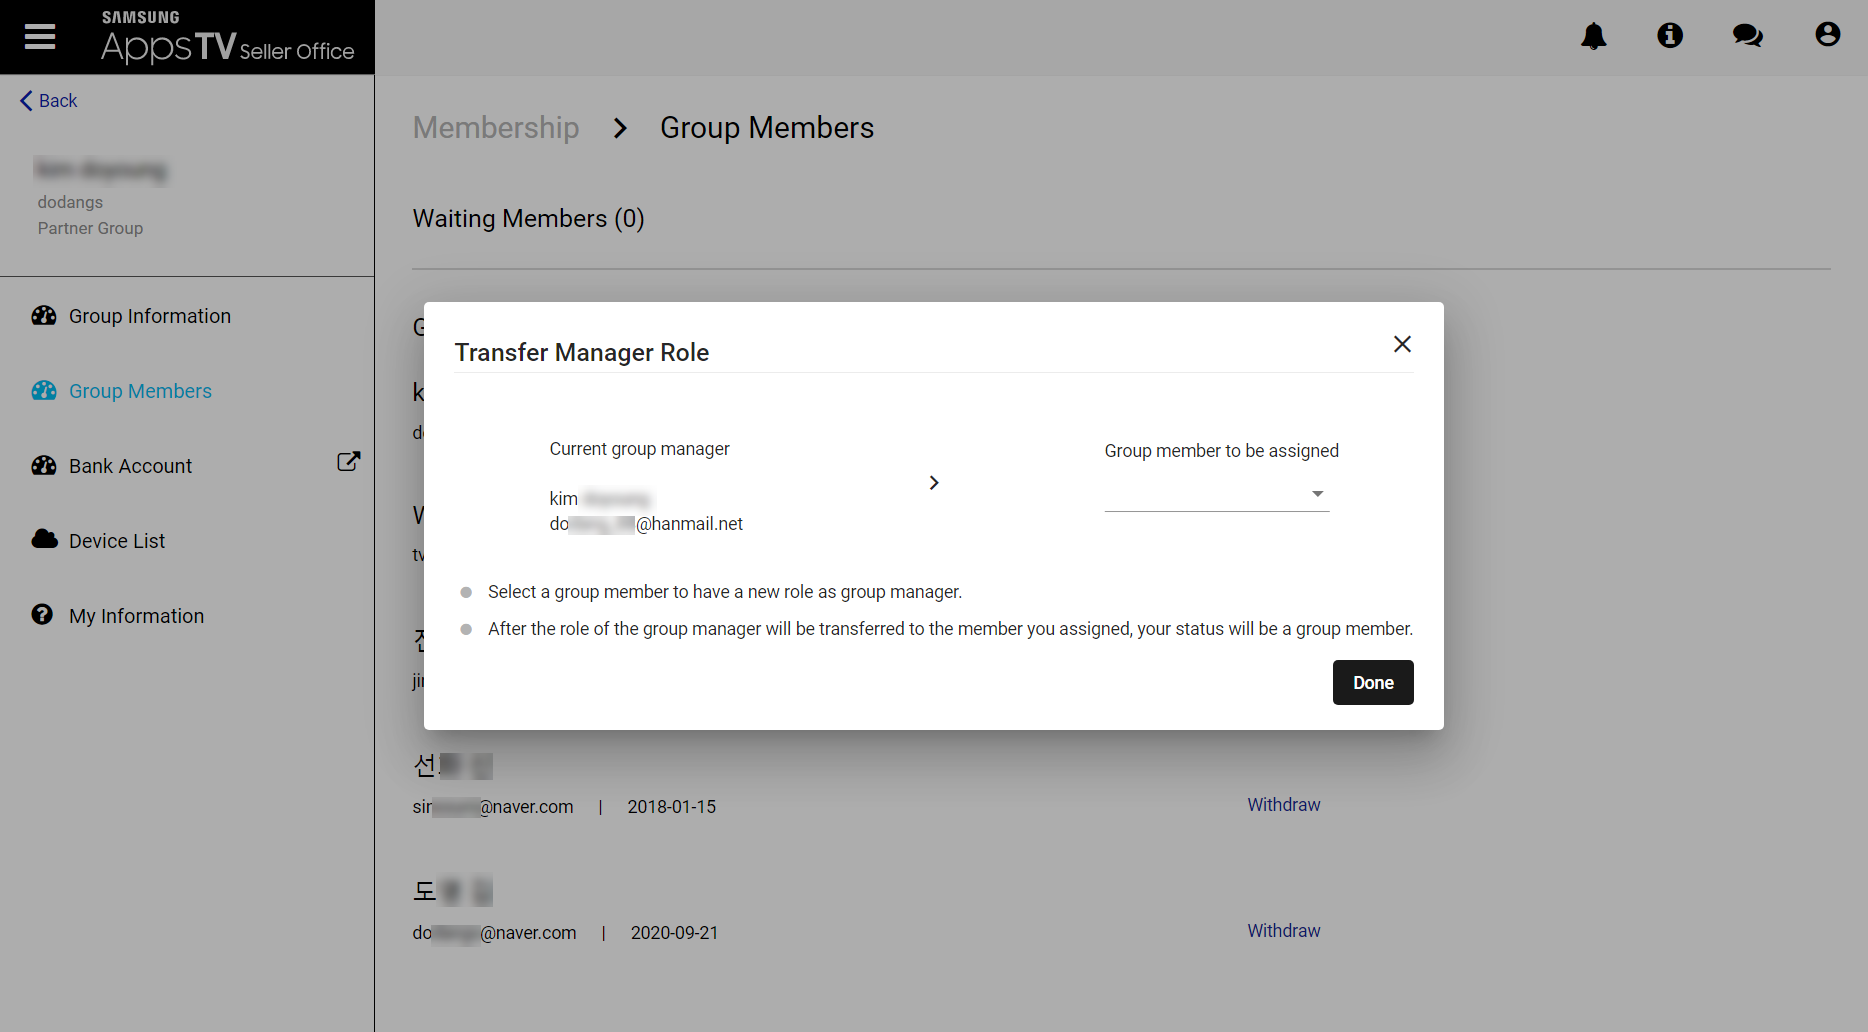 Figure 6. Transfer Manager Role